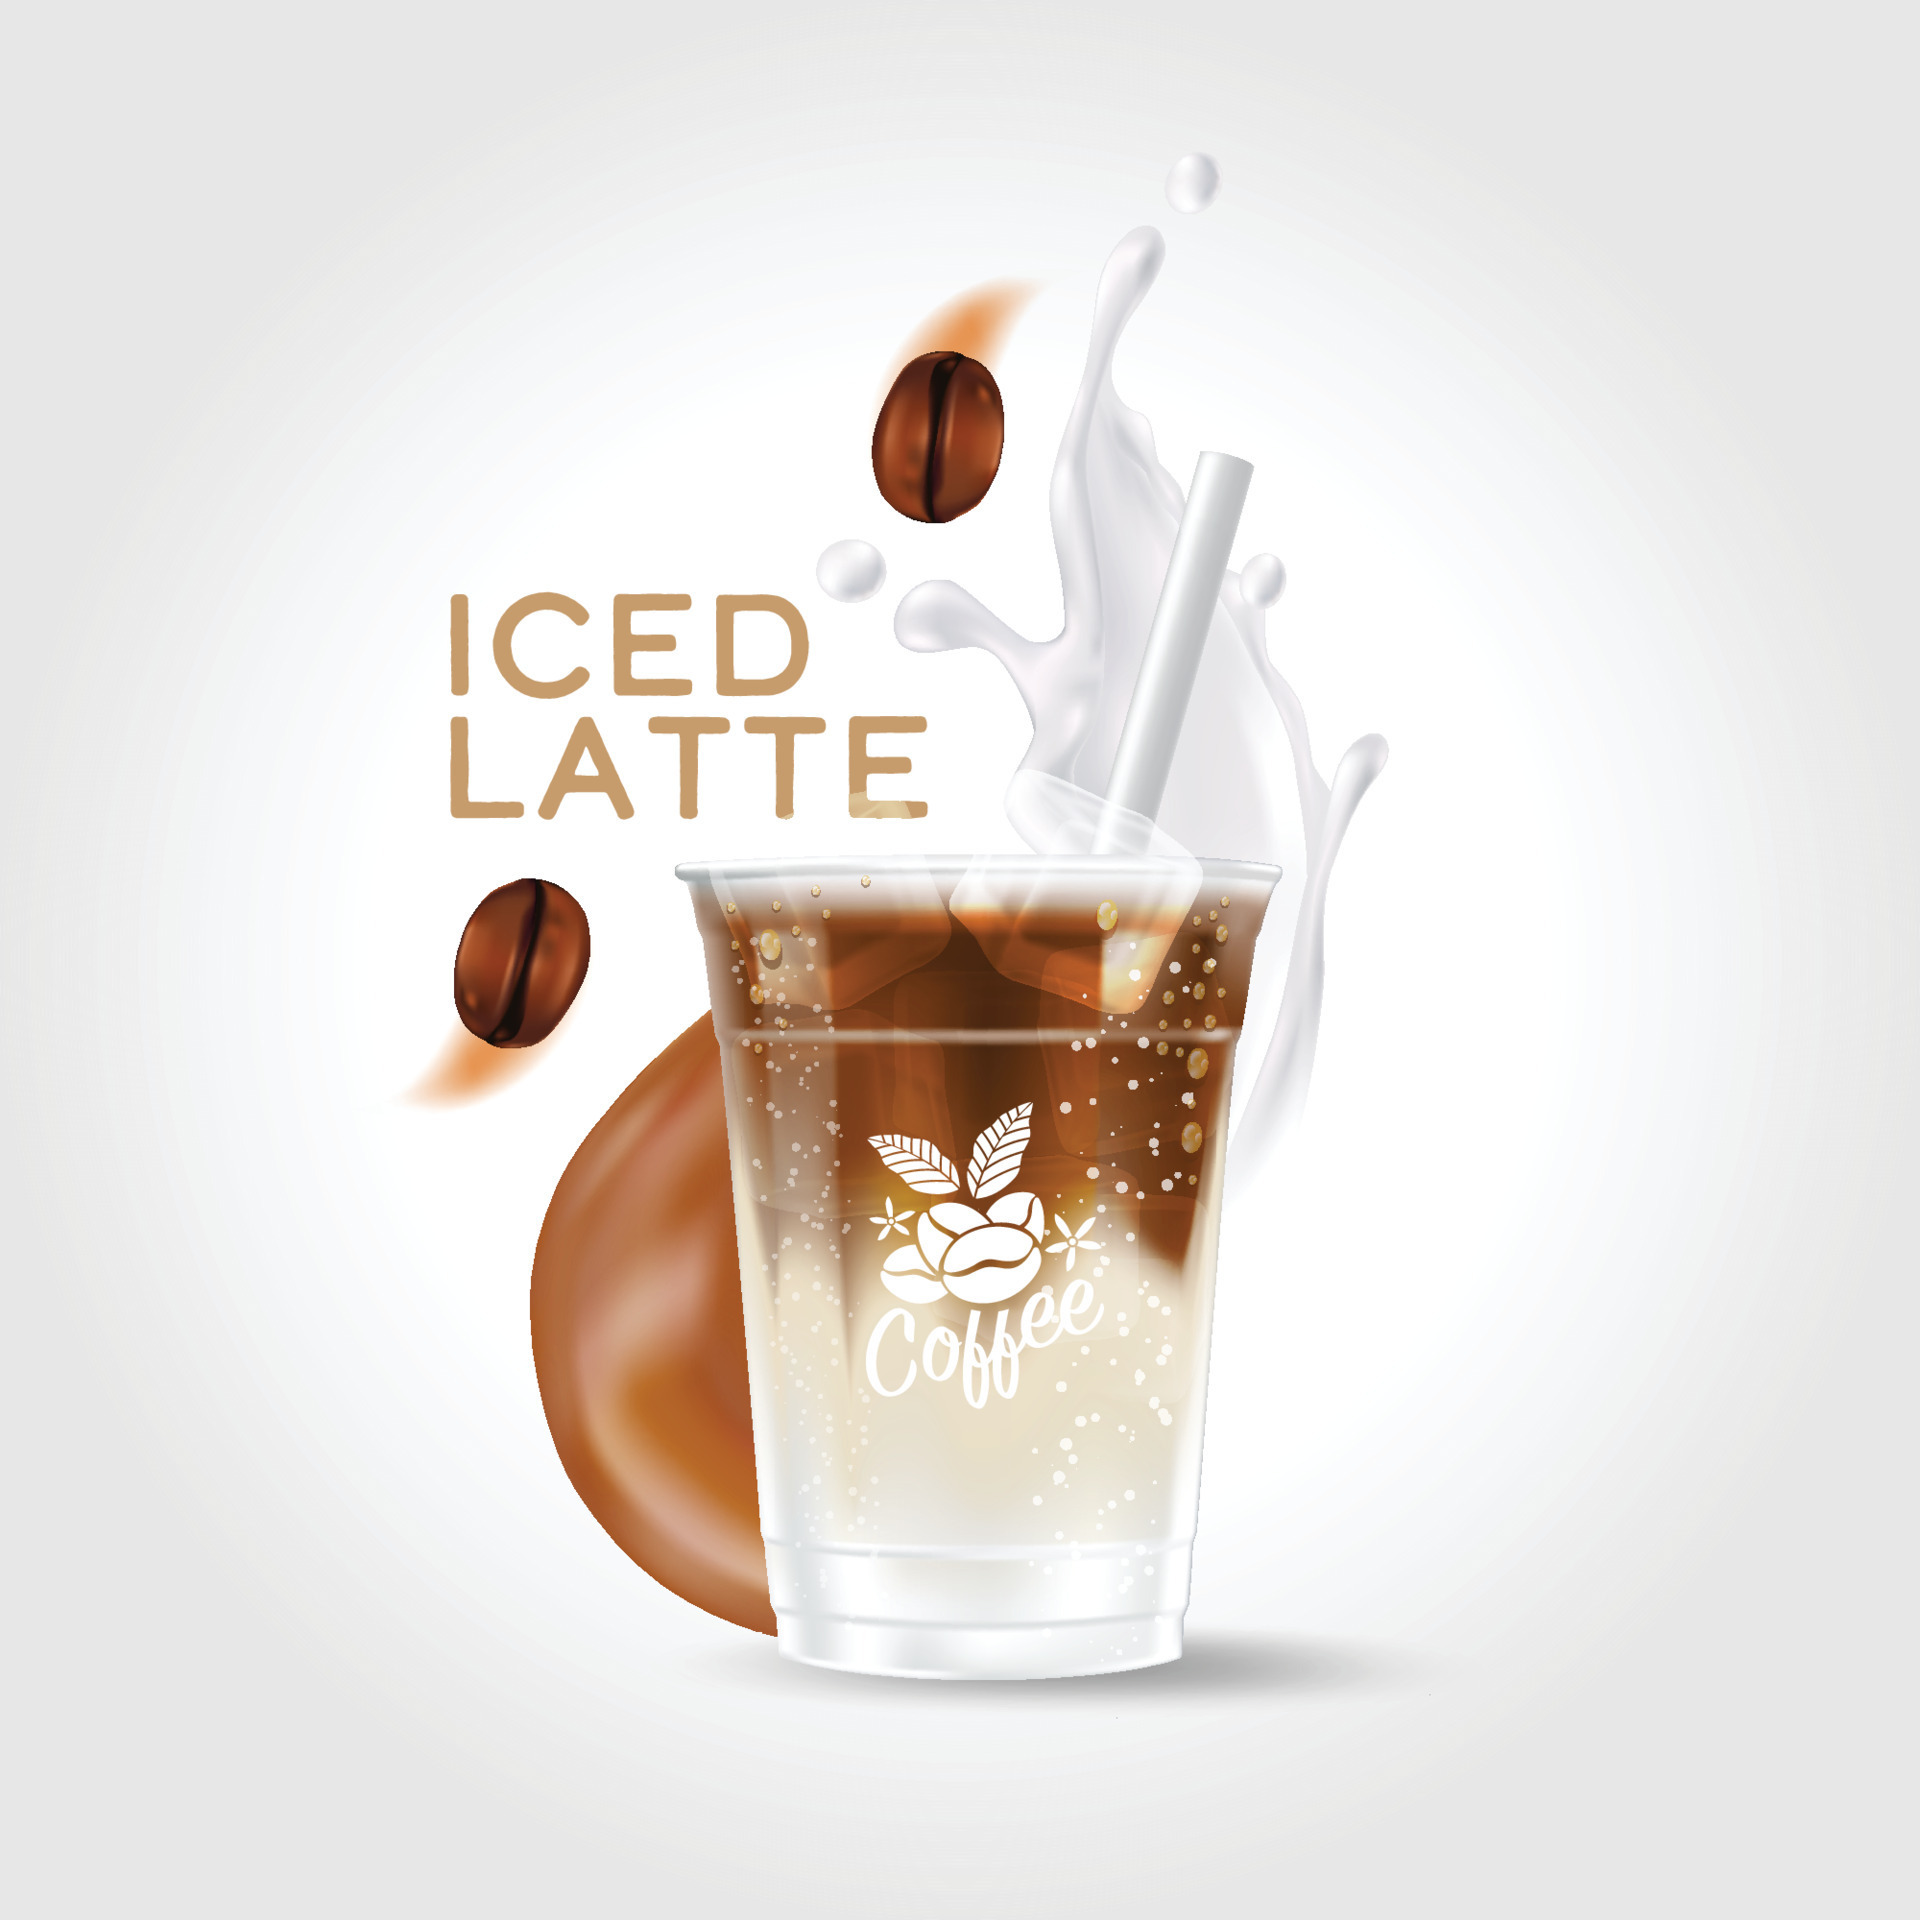 https://static.vecteezy.com/system/resources/previews/008/924/641/original/iced-coffee-takeaway-cup-illustration-iced-latte-vector.jpg